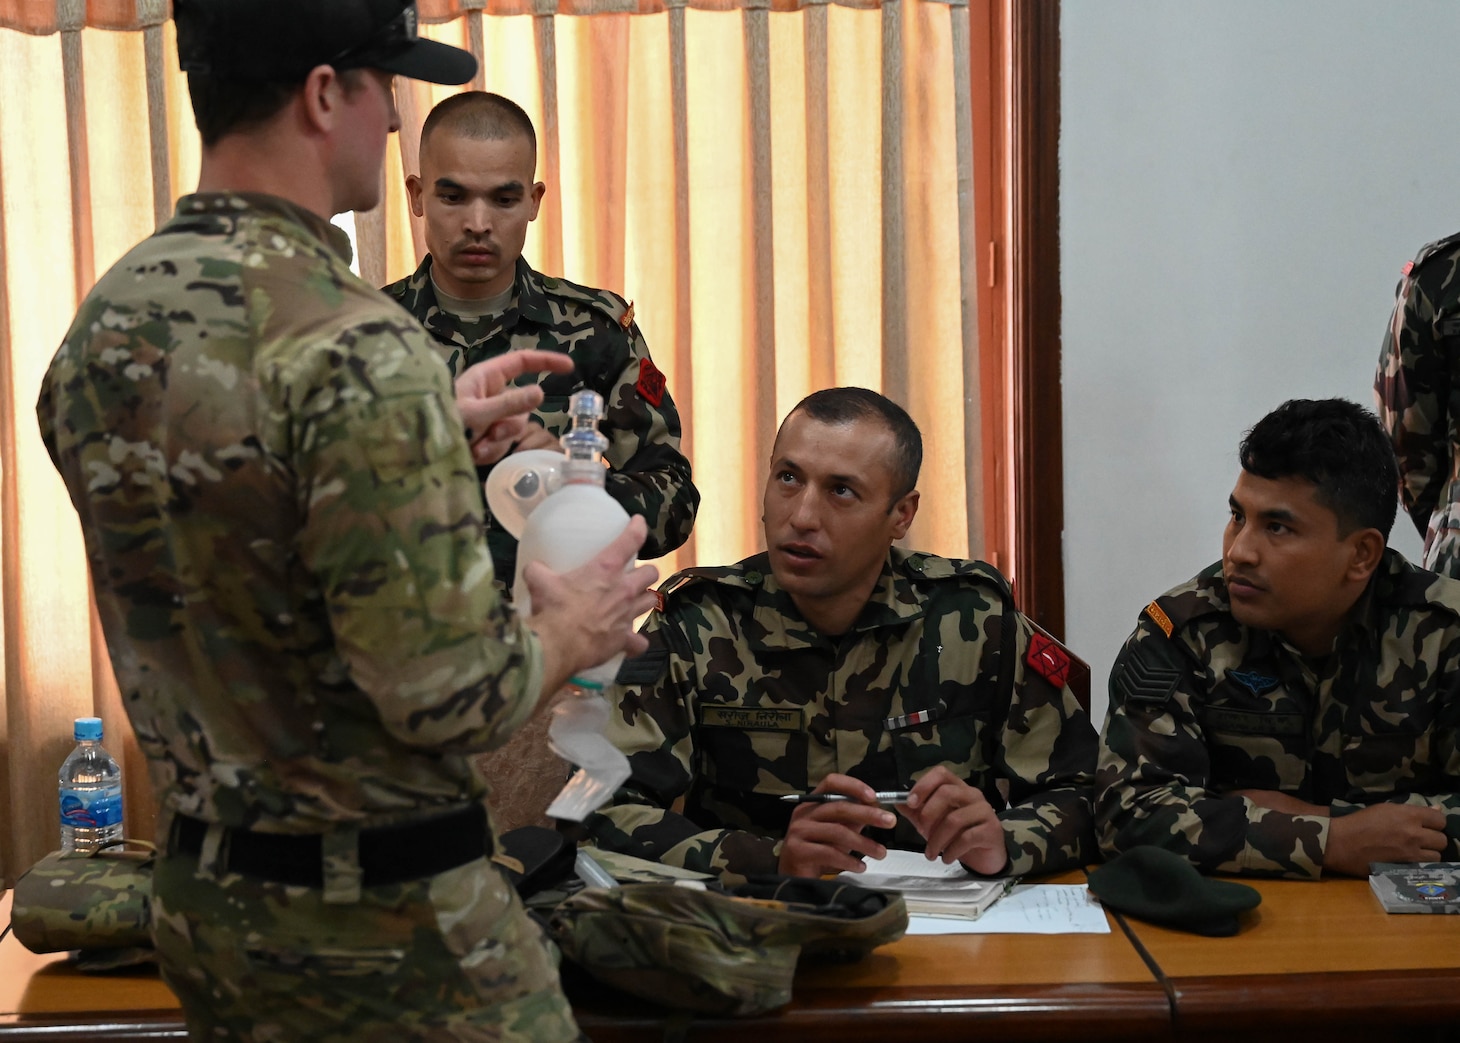 A U.S. Naval Special Warfare operator discusses tactical combat casualty care procedures with members of the Nepali Army and Nepali Special Operations Force (SOF) Brigade during a subject matter expert exchange at Ganesh Kashya, the Nepali Army headquarters in Kathmandu, Nepal. Naval Special Warfare trains with forces worldwide to improve and further specialize skills required to conduct missions and respond to crises.